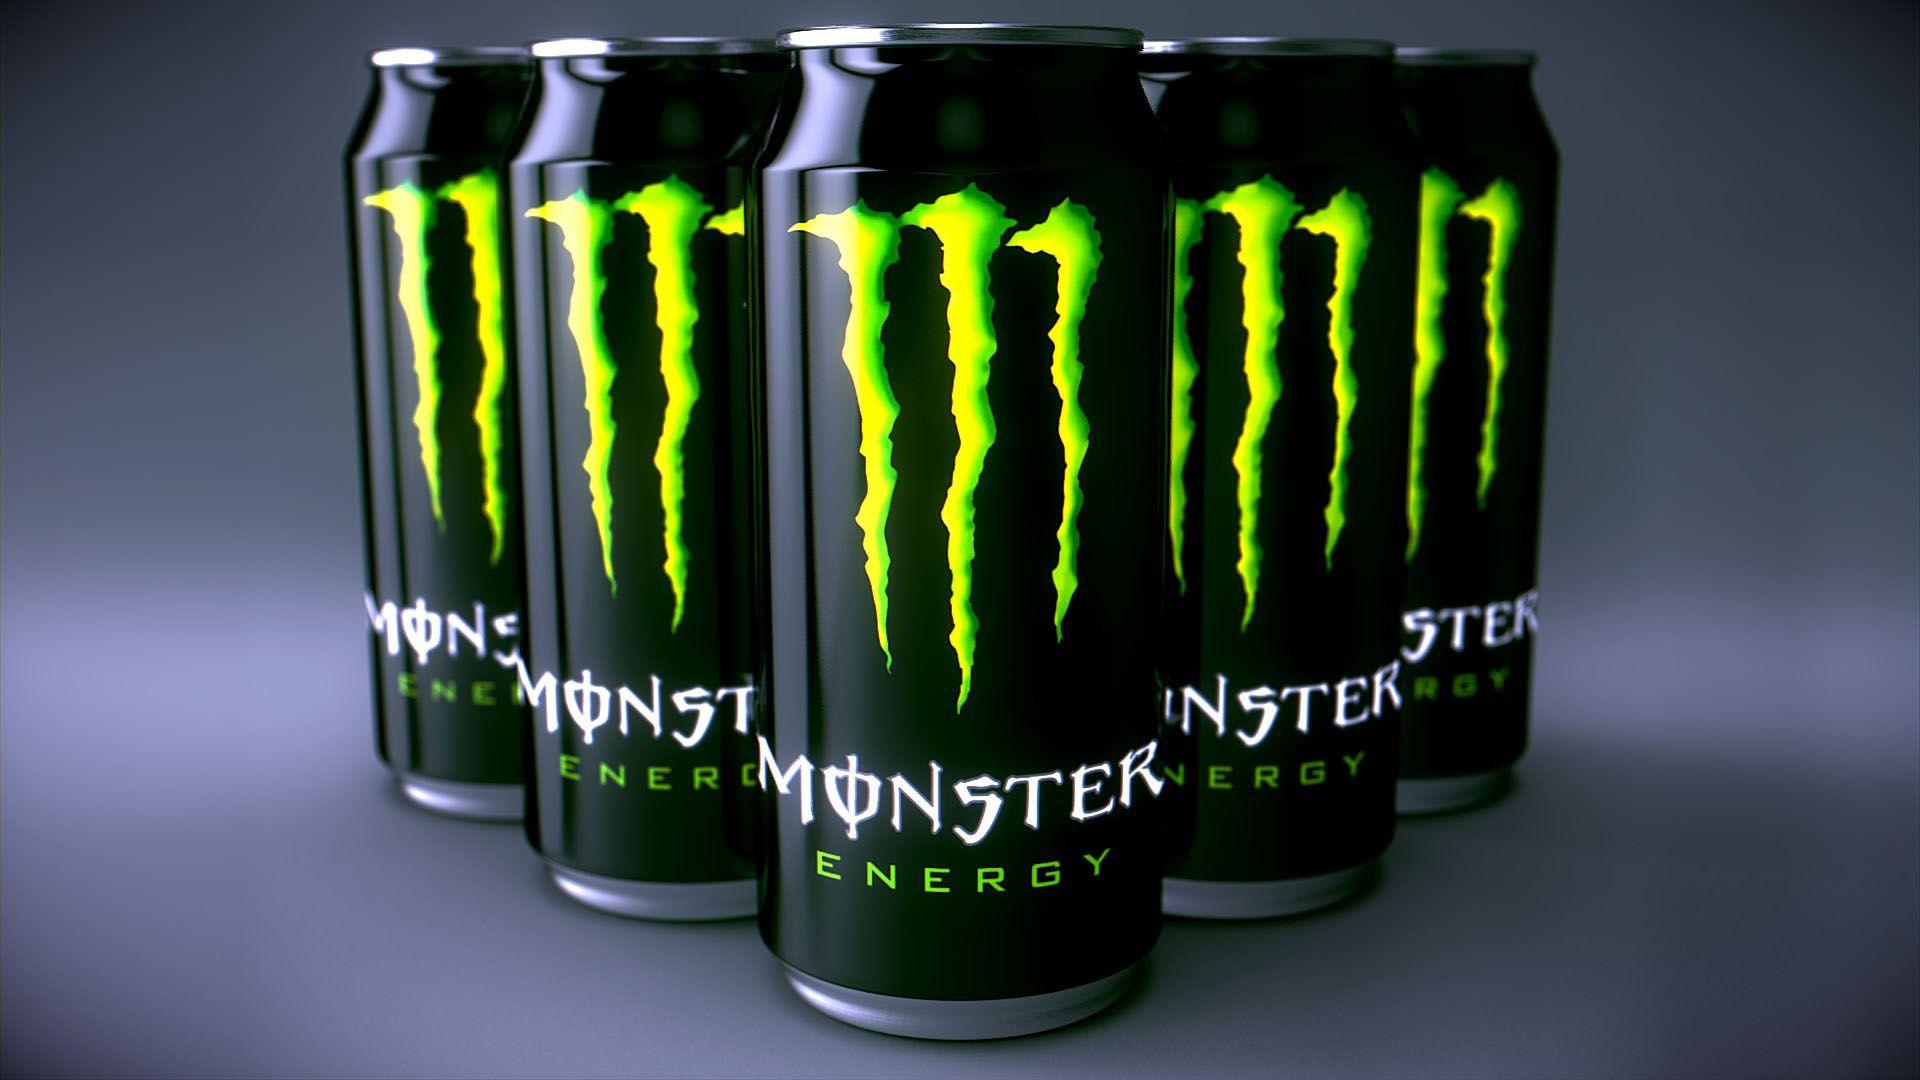 Monster Energy Wallpaper, Picture, Image